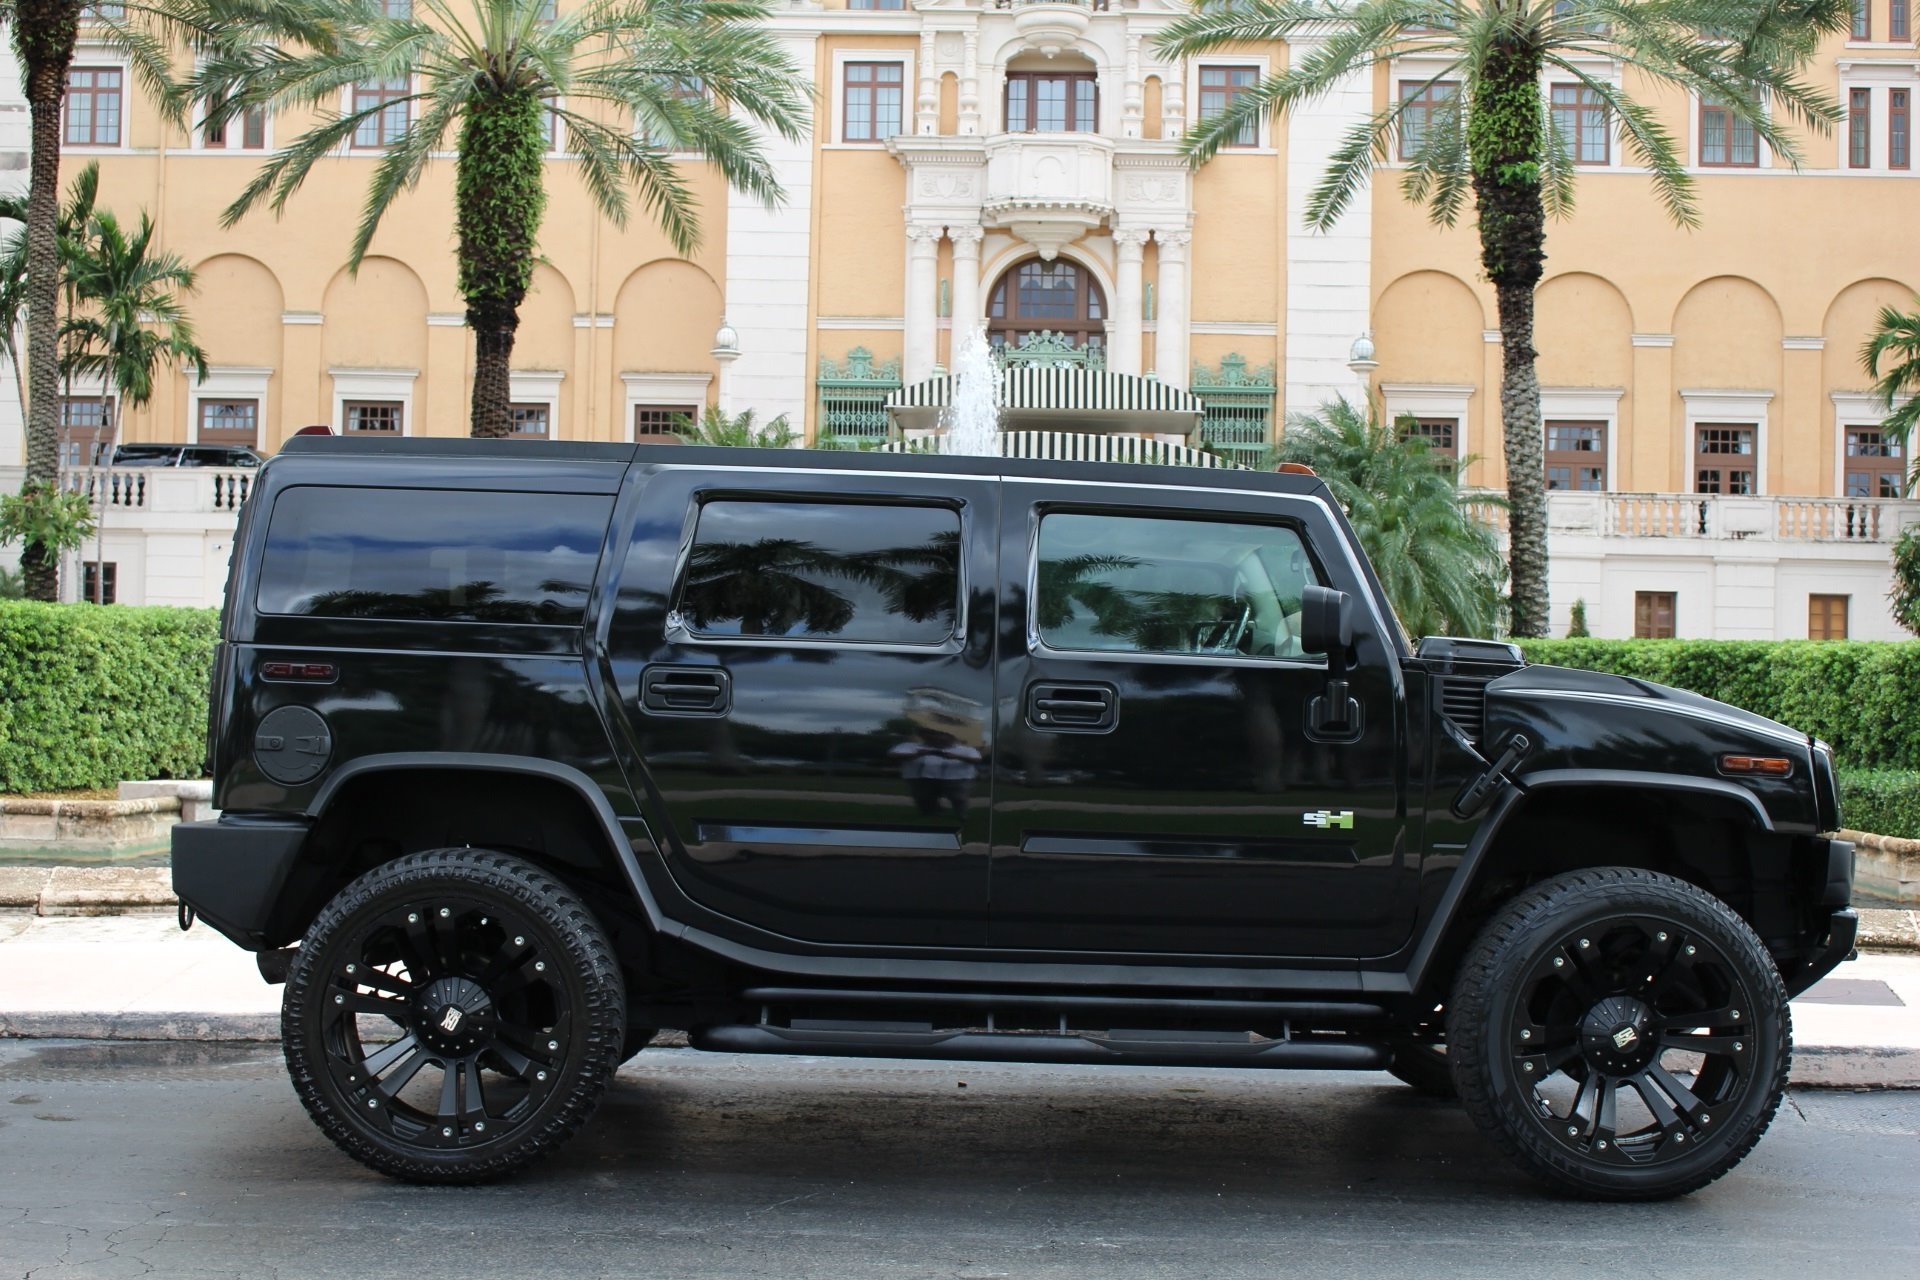 Used 2004 HUMMER H2 Lux Series for sale Sold at The Gables Sports Cars in Miami FL 33146 1